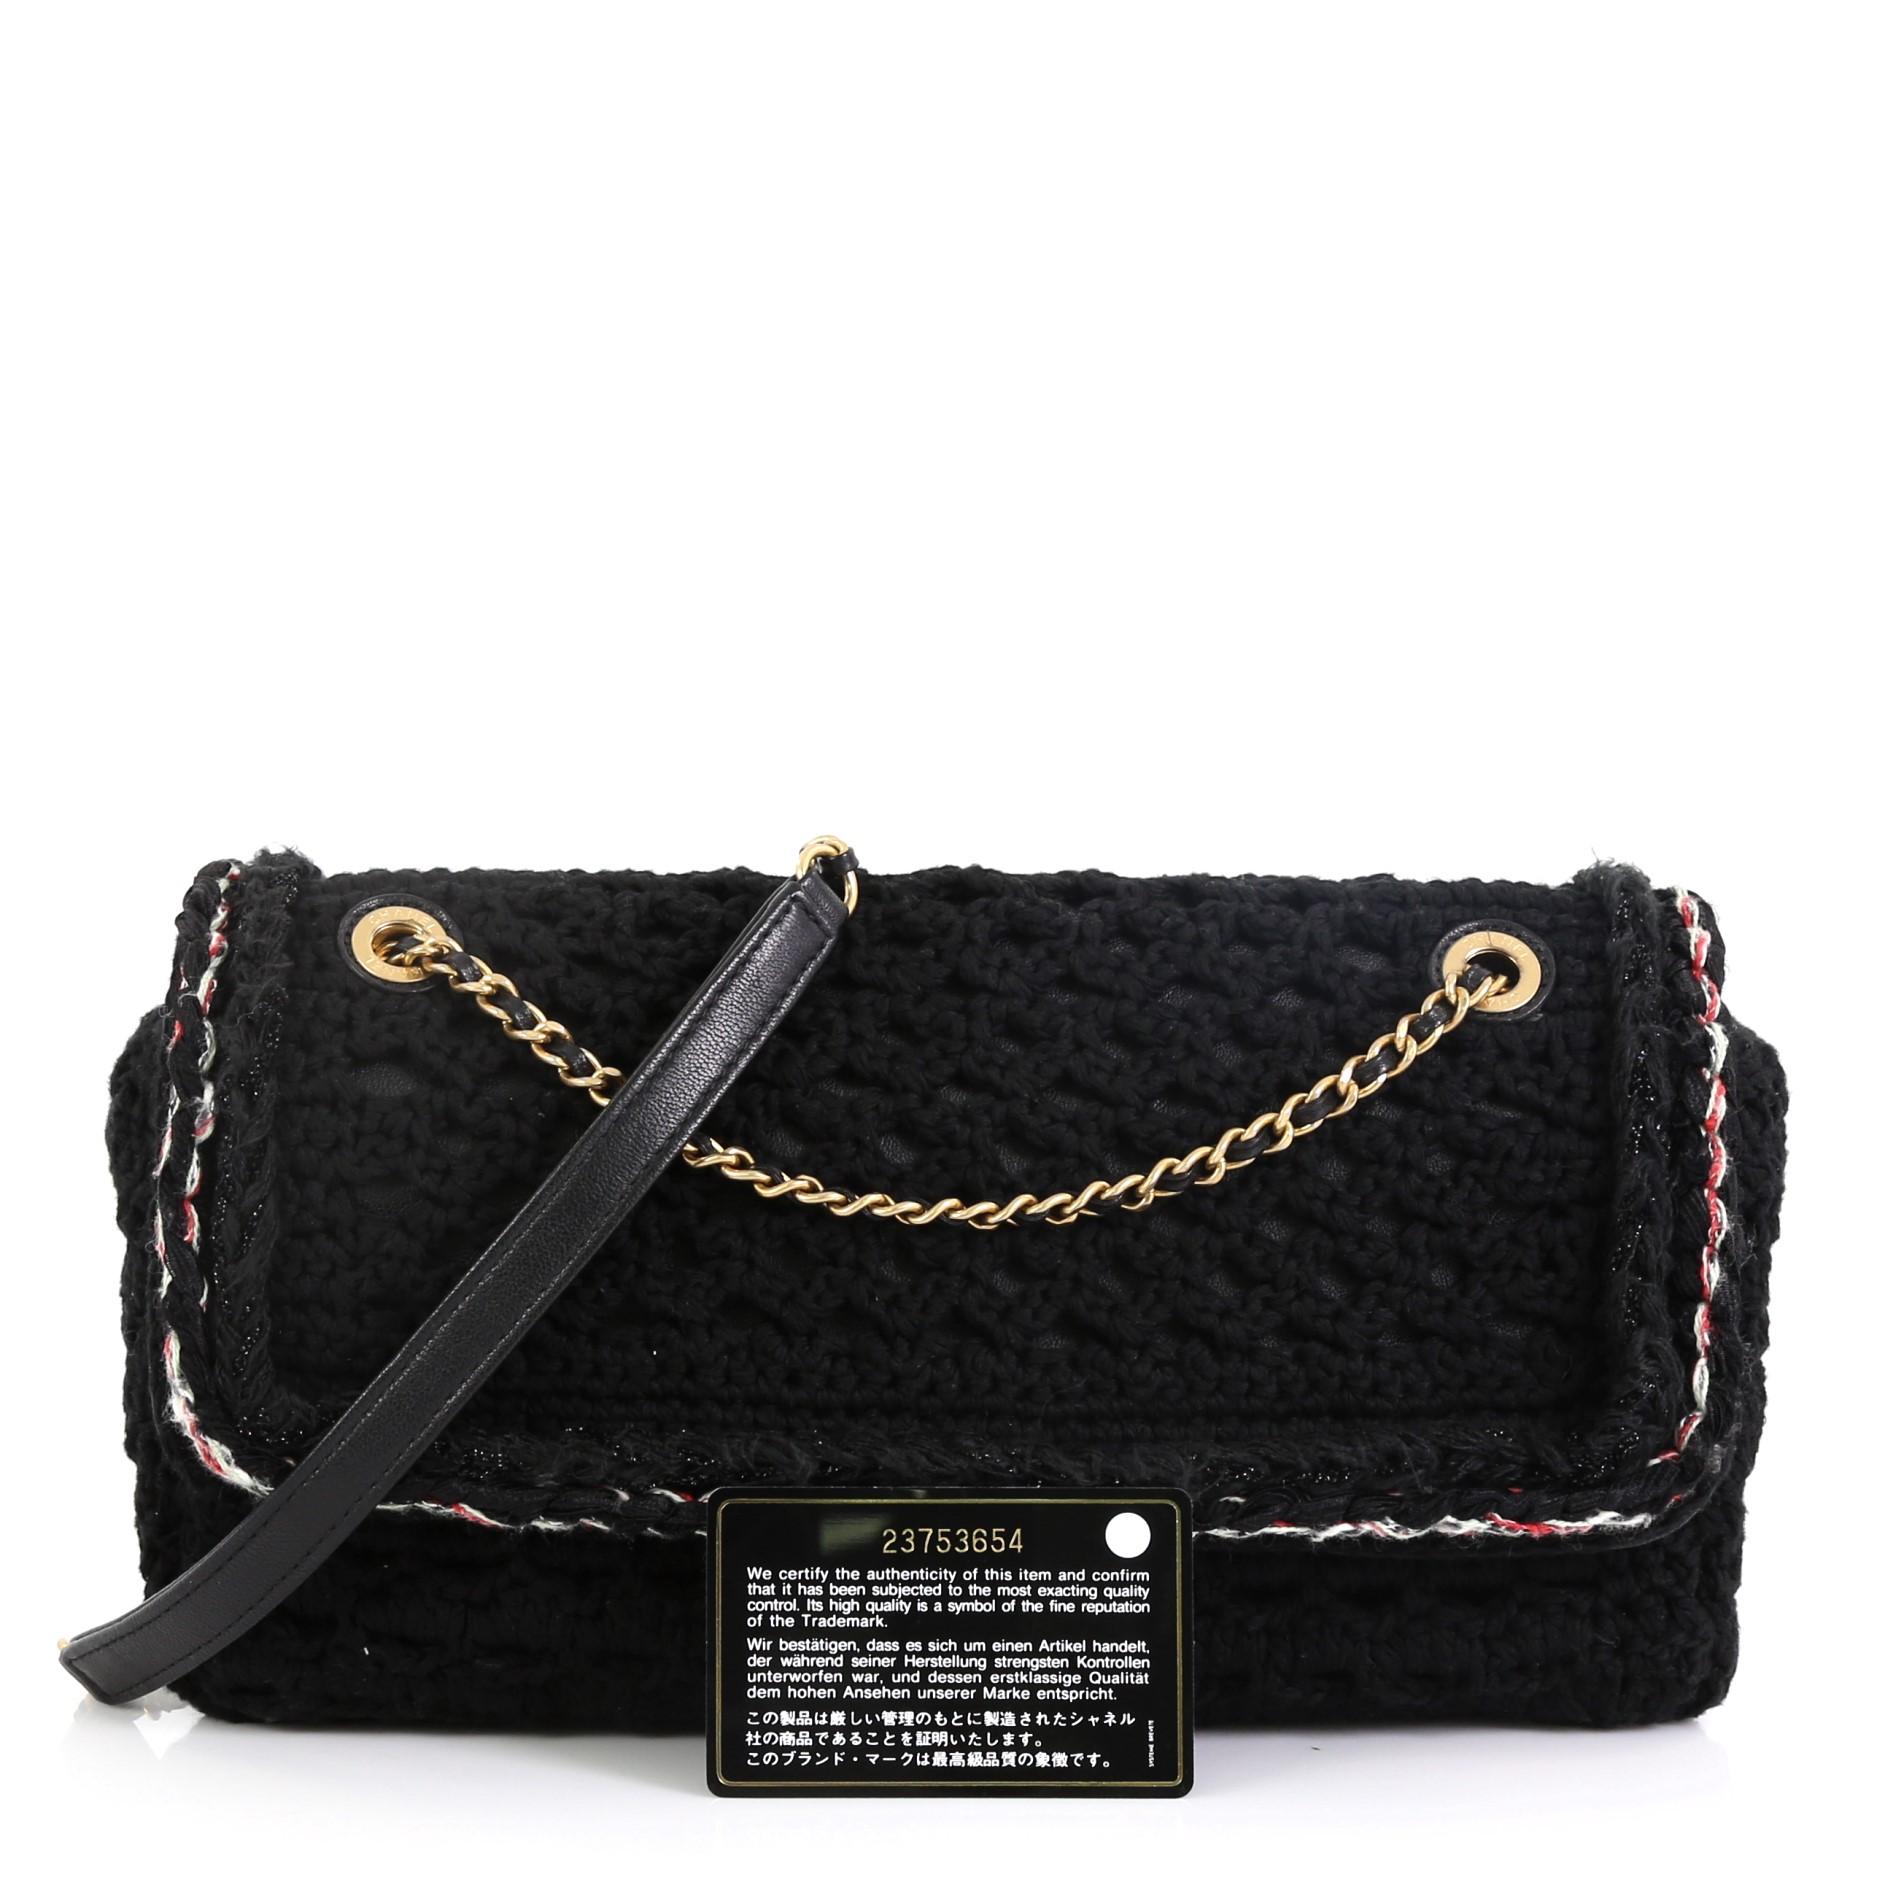 This Chanel Cayo Coco Flap Bag Crochet Medium, crafted in black crochet fabric, features woven-in leather chain strap and gold-tone hardware. Its CC turn-lock closure opens to a black fabric interior with zip pocket. Hologram sticker reads: 23753654